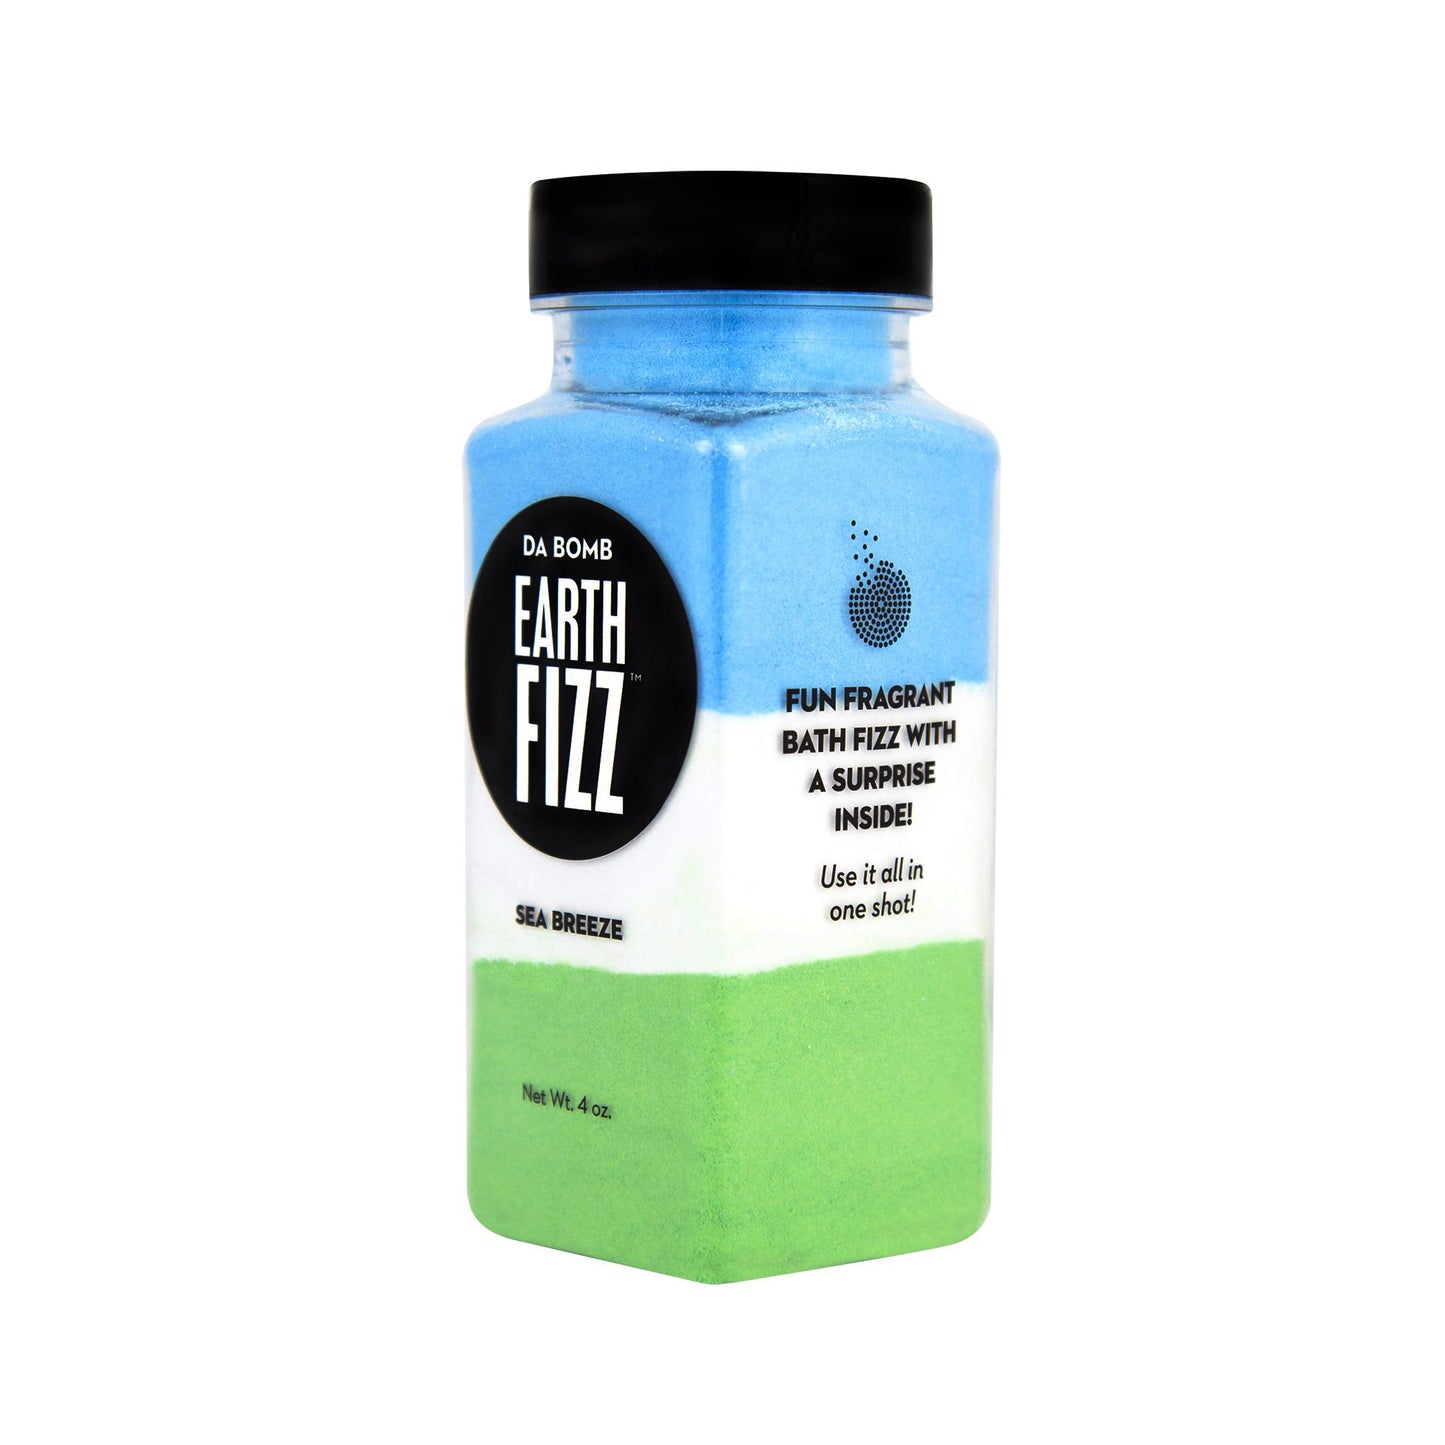 Small, clear plastic jar containing color block green, white and blue bath fizz that smells like sea breeze. Jar contains a fun surprise.